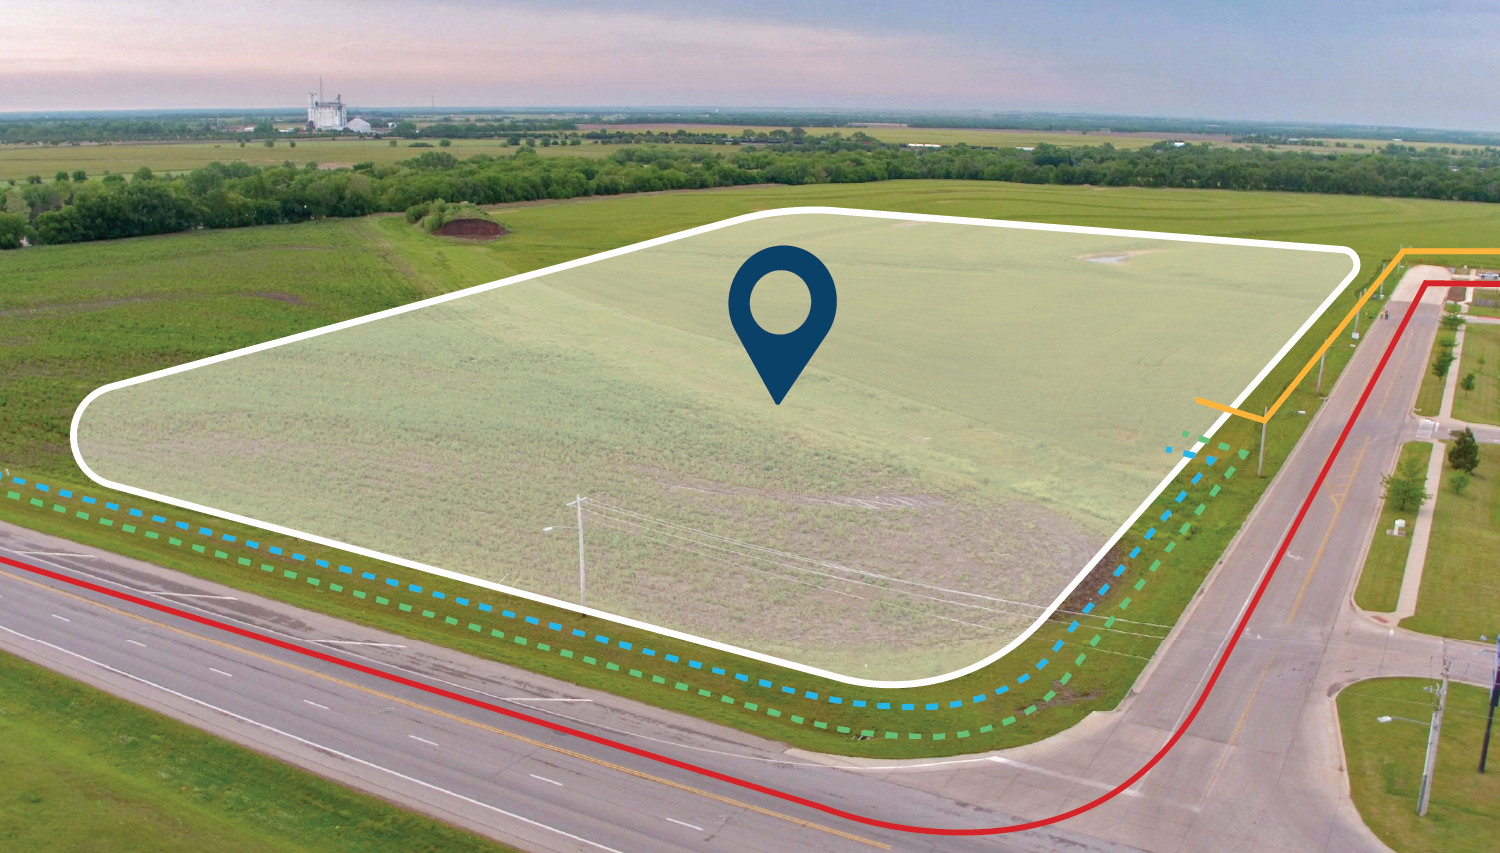 Drone image of a location with utility lines drawn around a potential build site